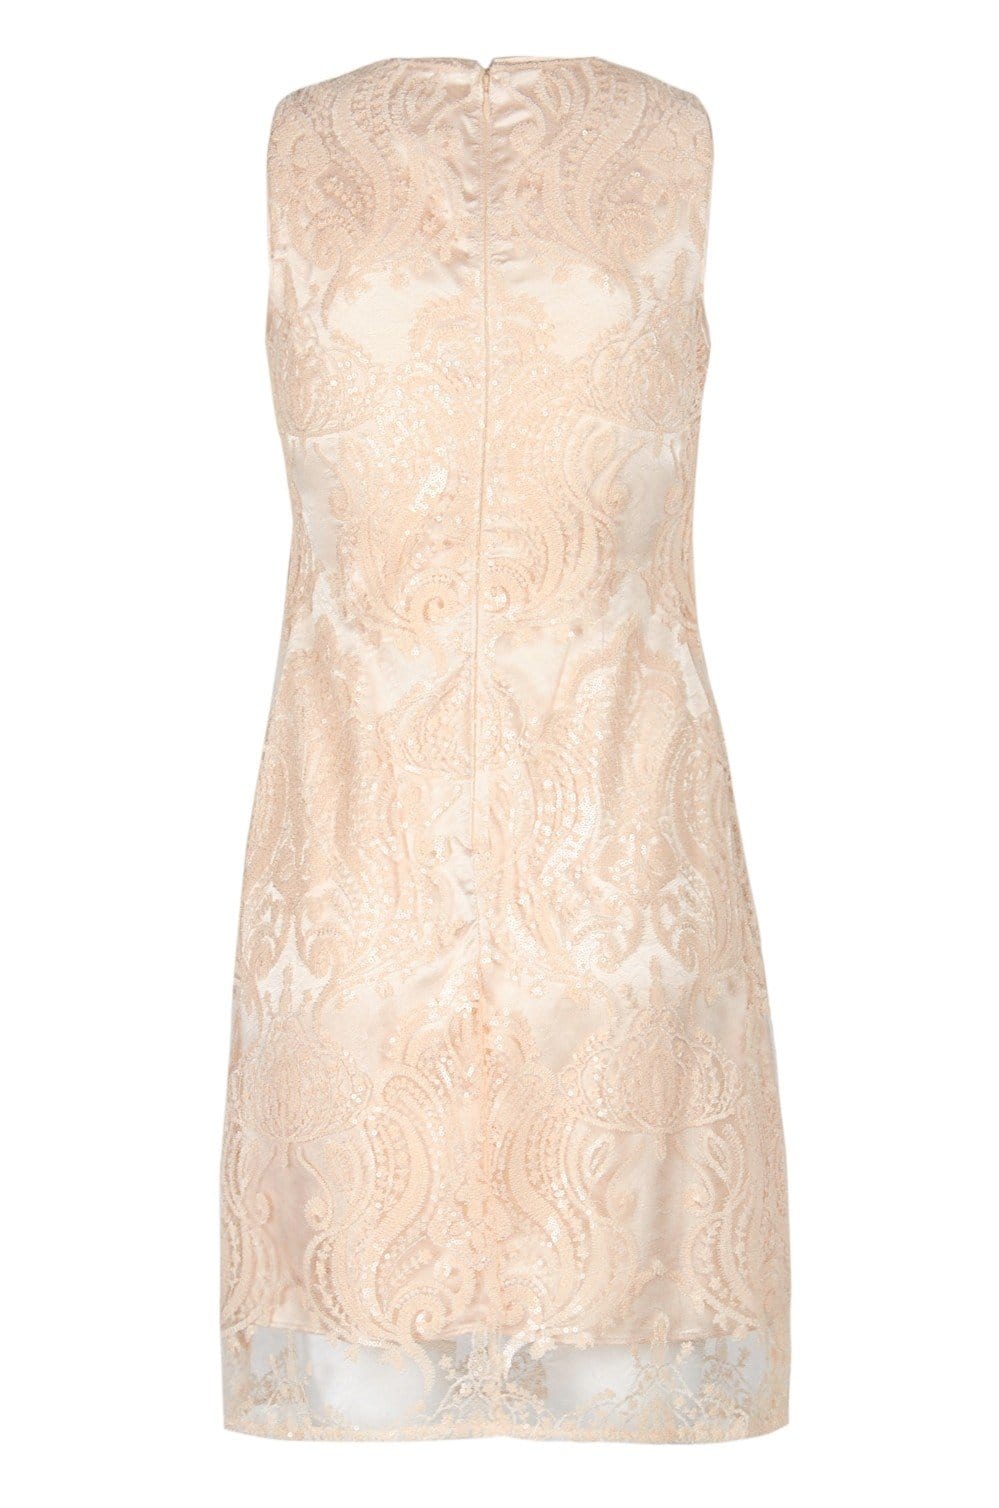 Taylor - 9734M Sequined Mesh Short Sheath Dress In Nude